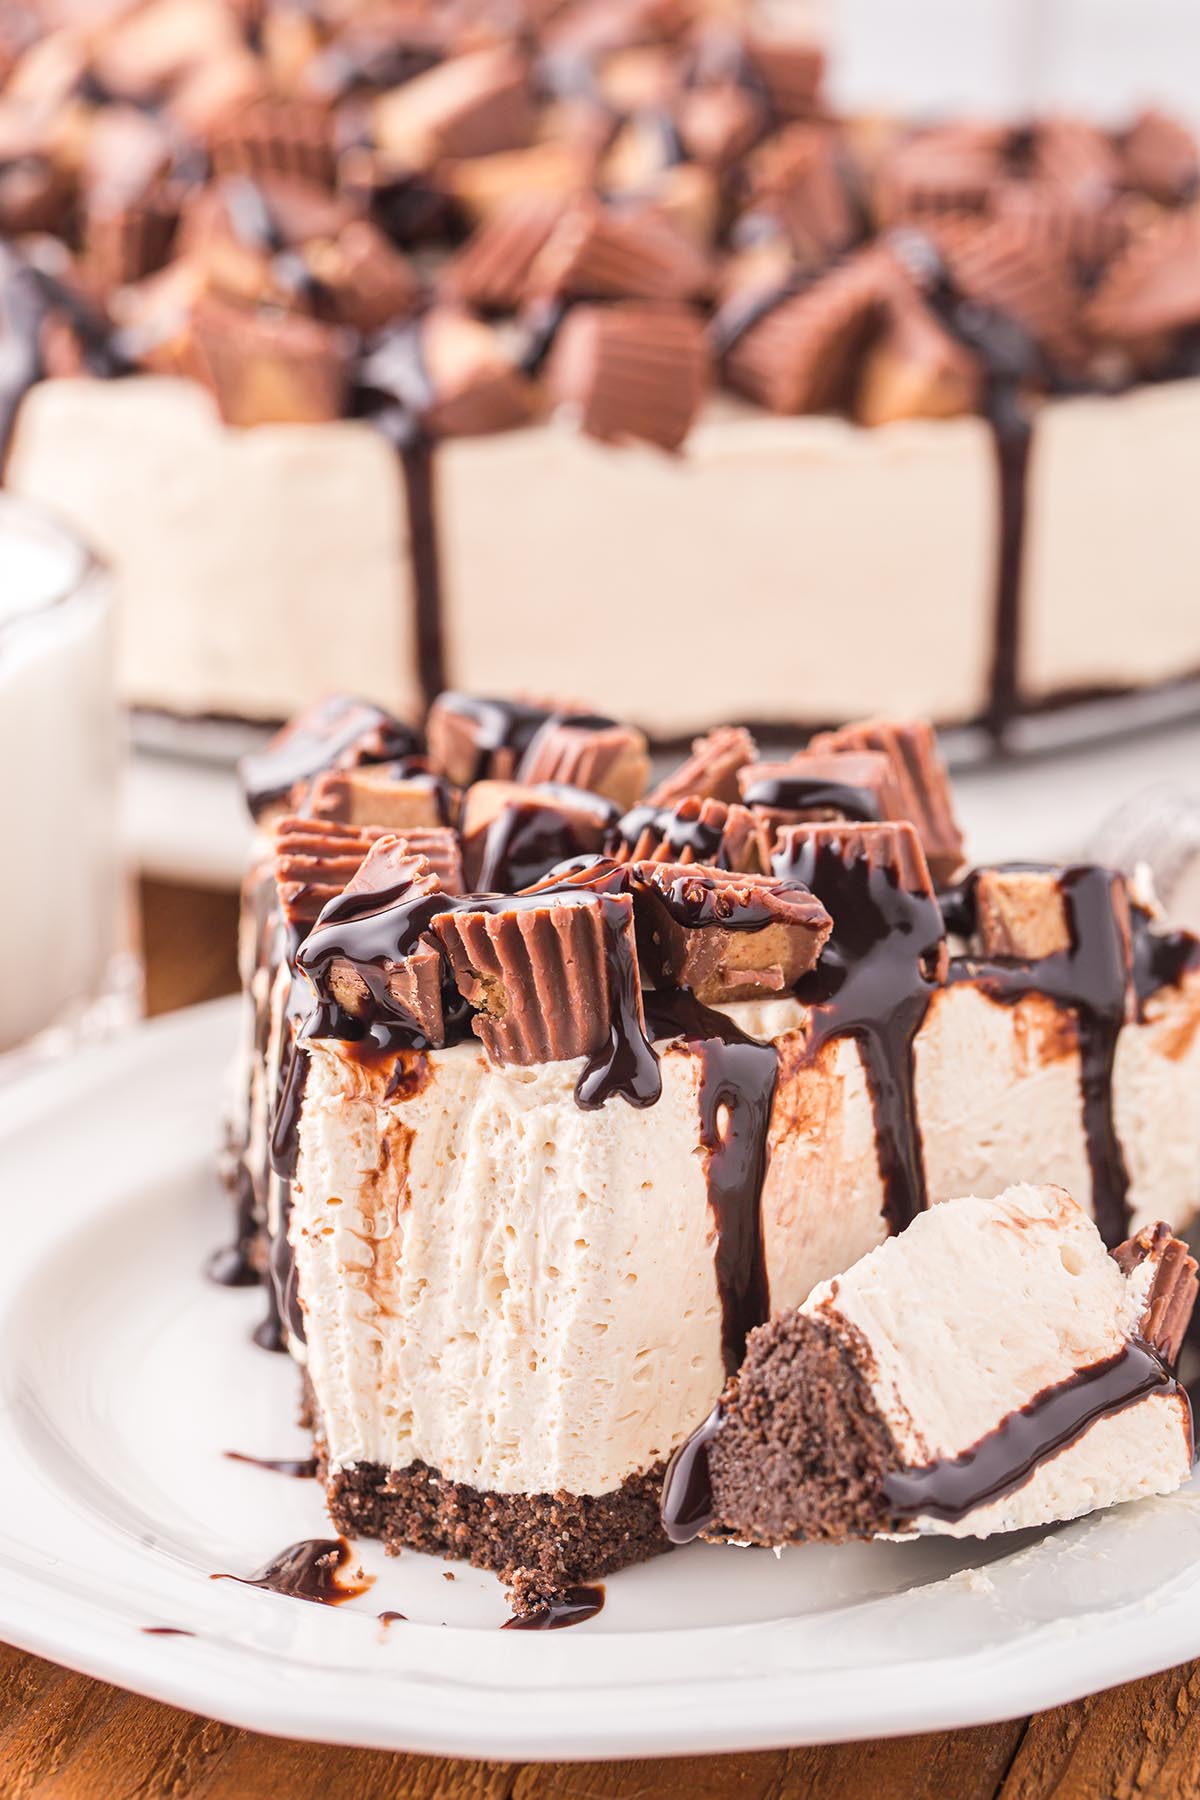 one slice of Reese's No Bake Cheesecake on the plate